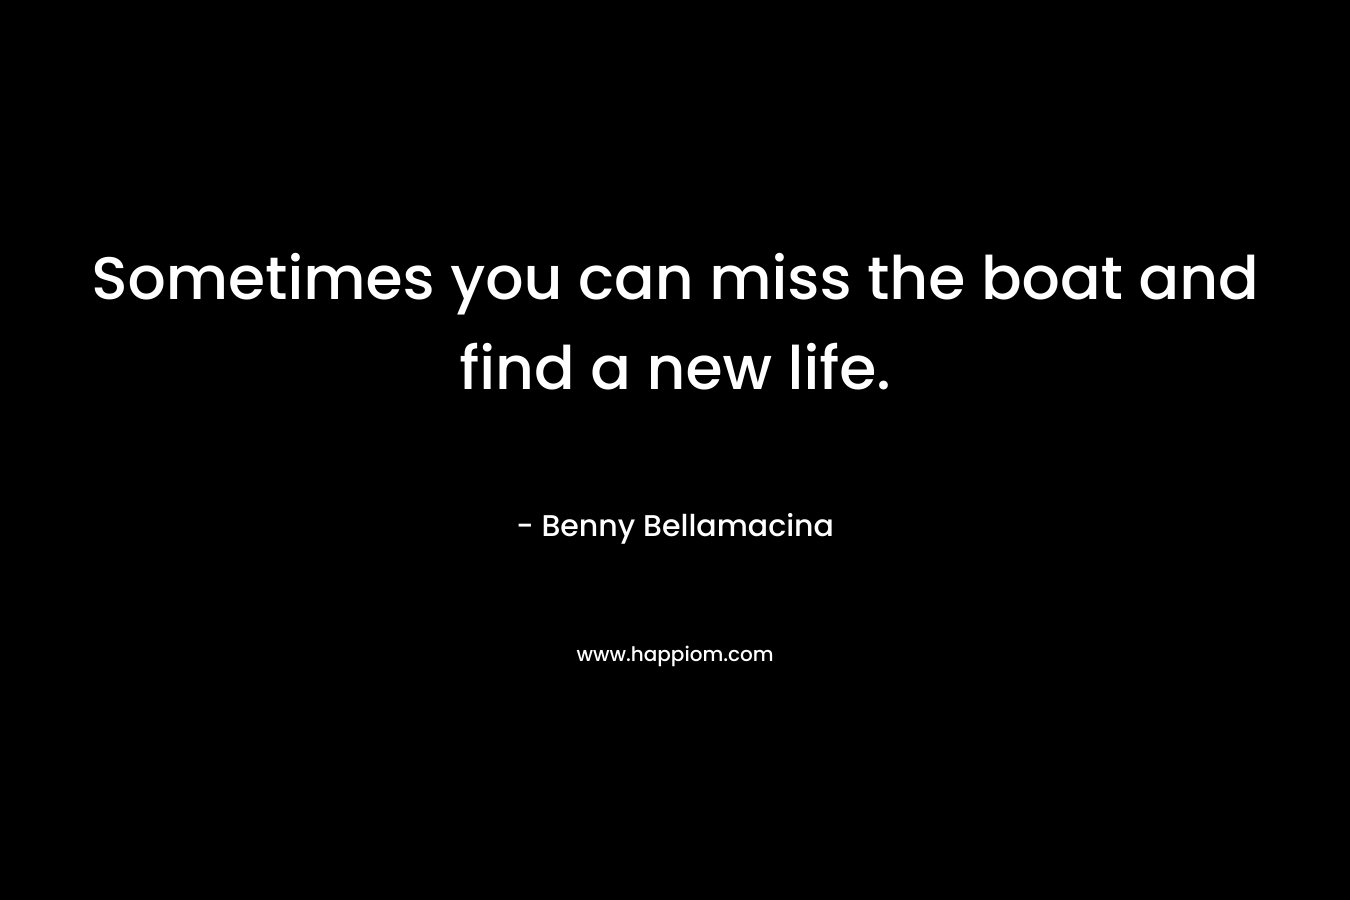 Sometimes you can miss the boat and find a new life.